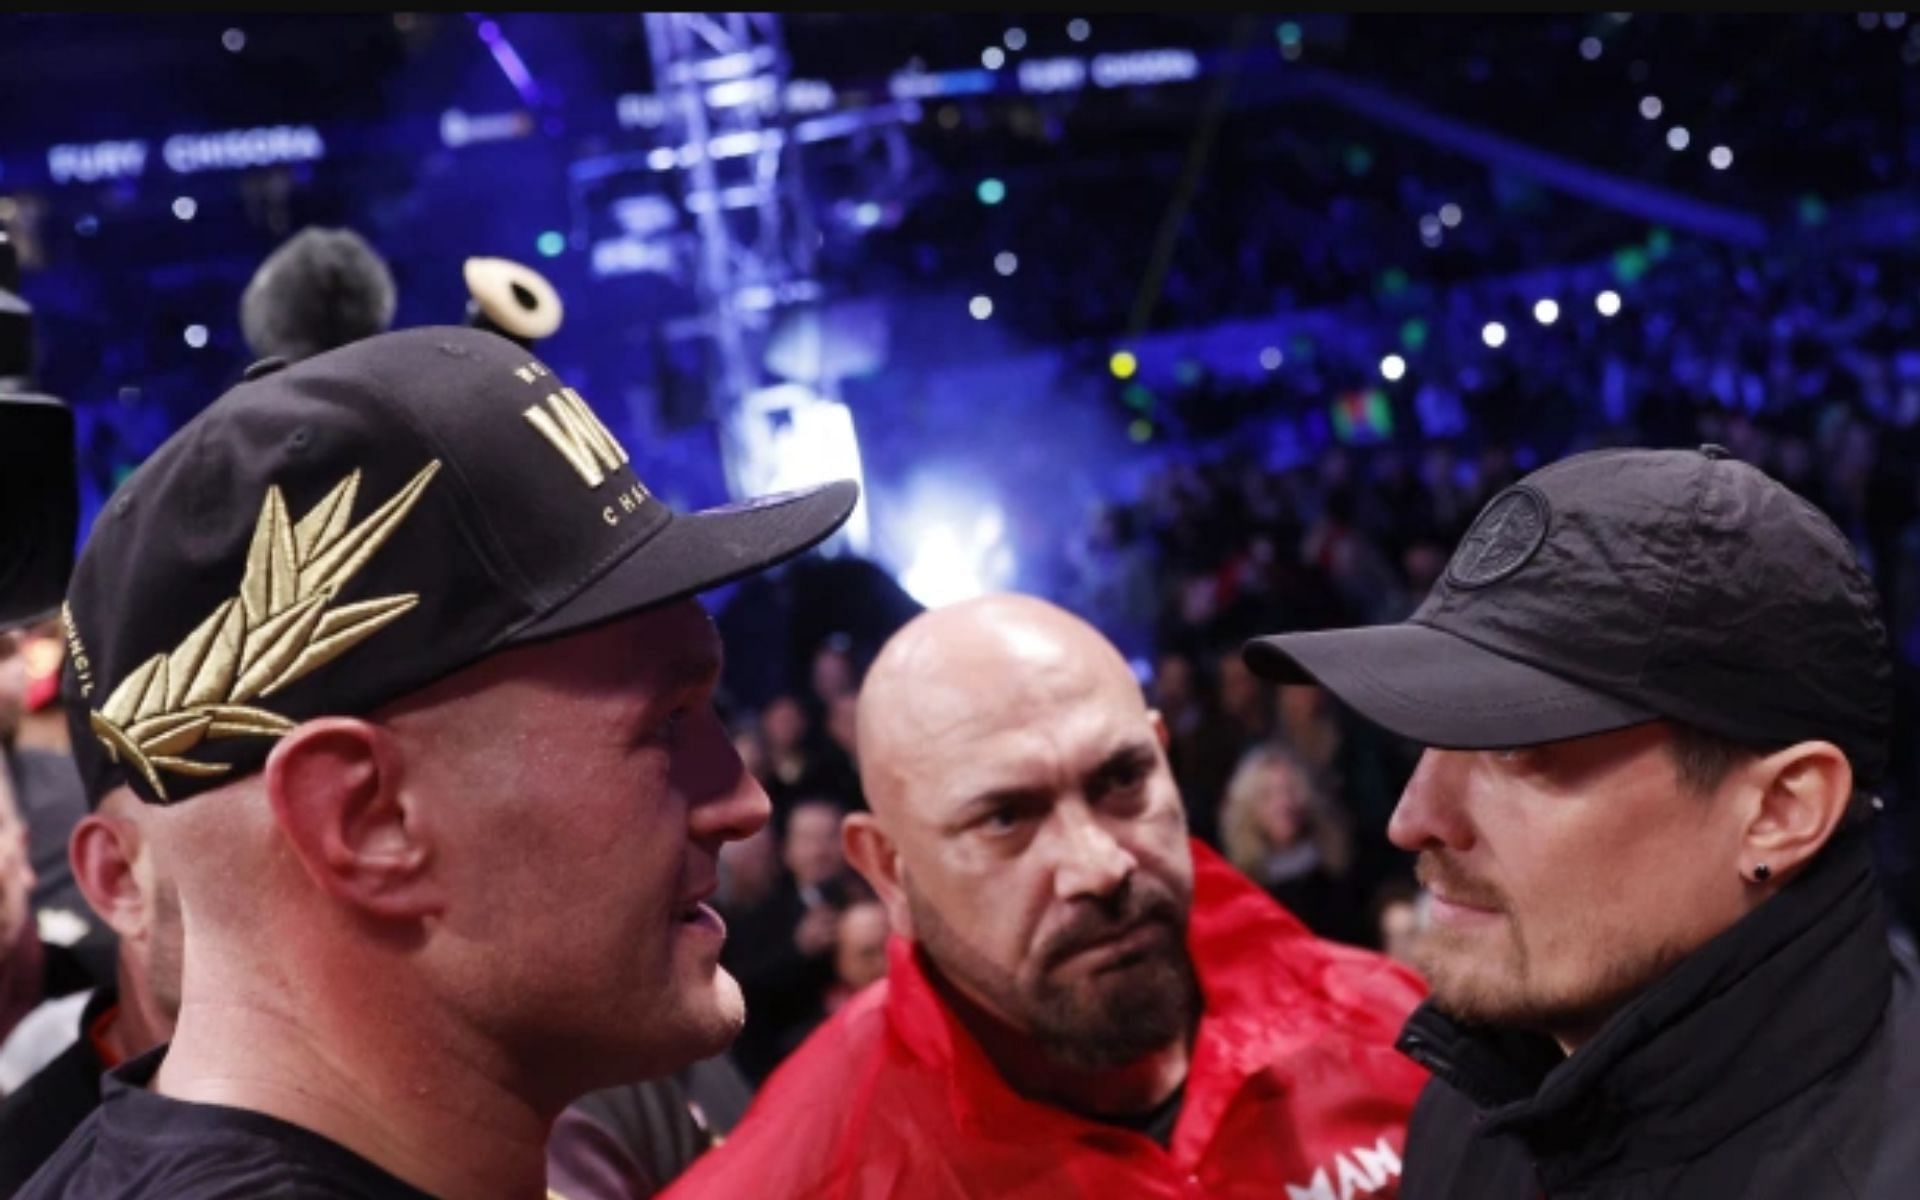 Tyson Fury (Left) and Oleksandr Usyk (Right) (Image Credits: Reuters)